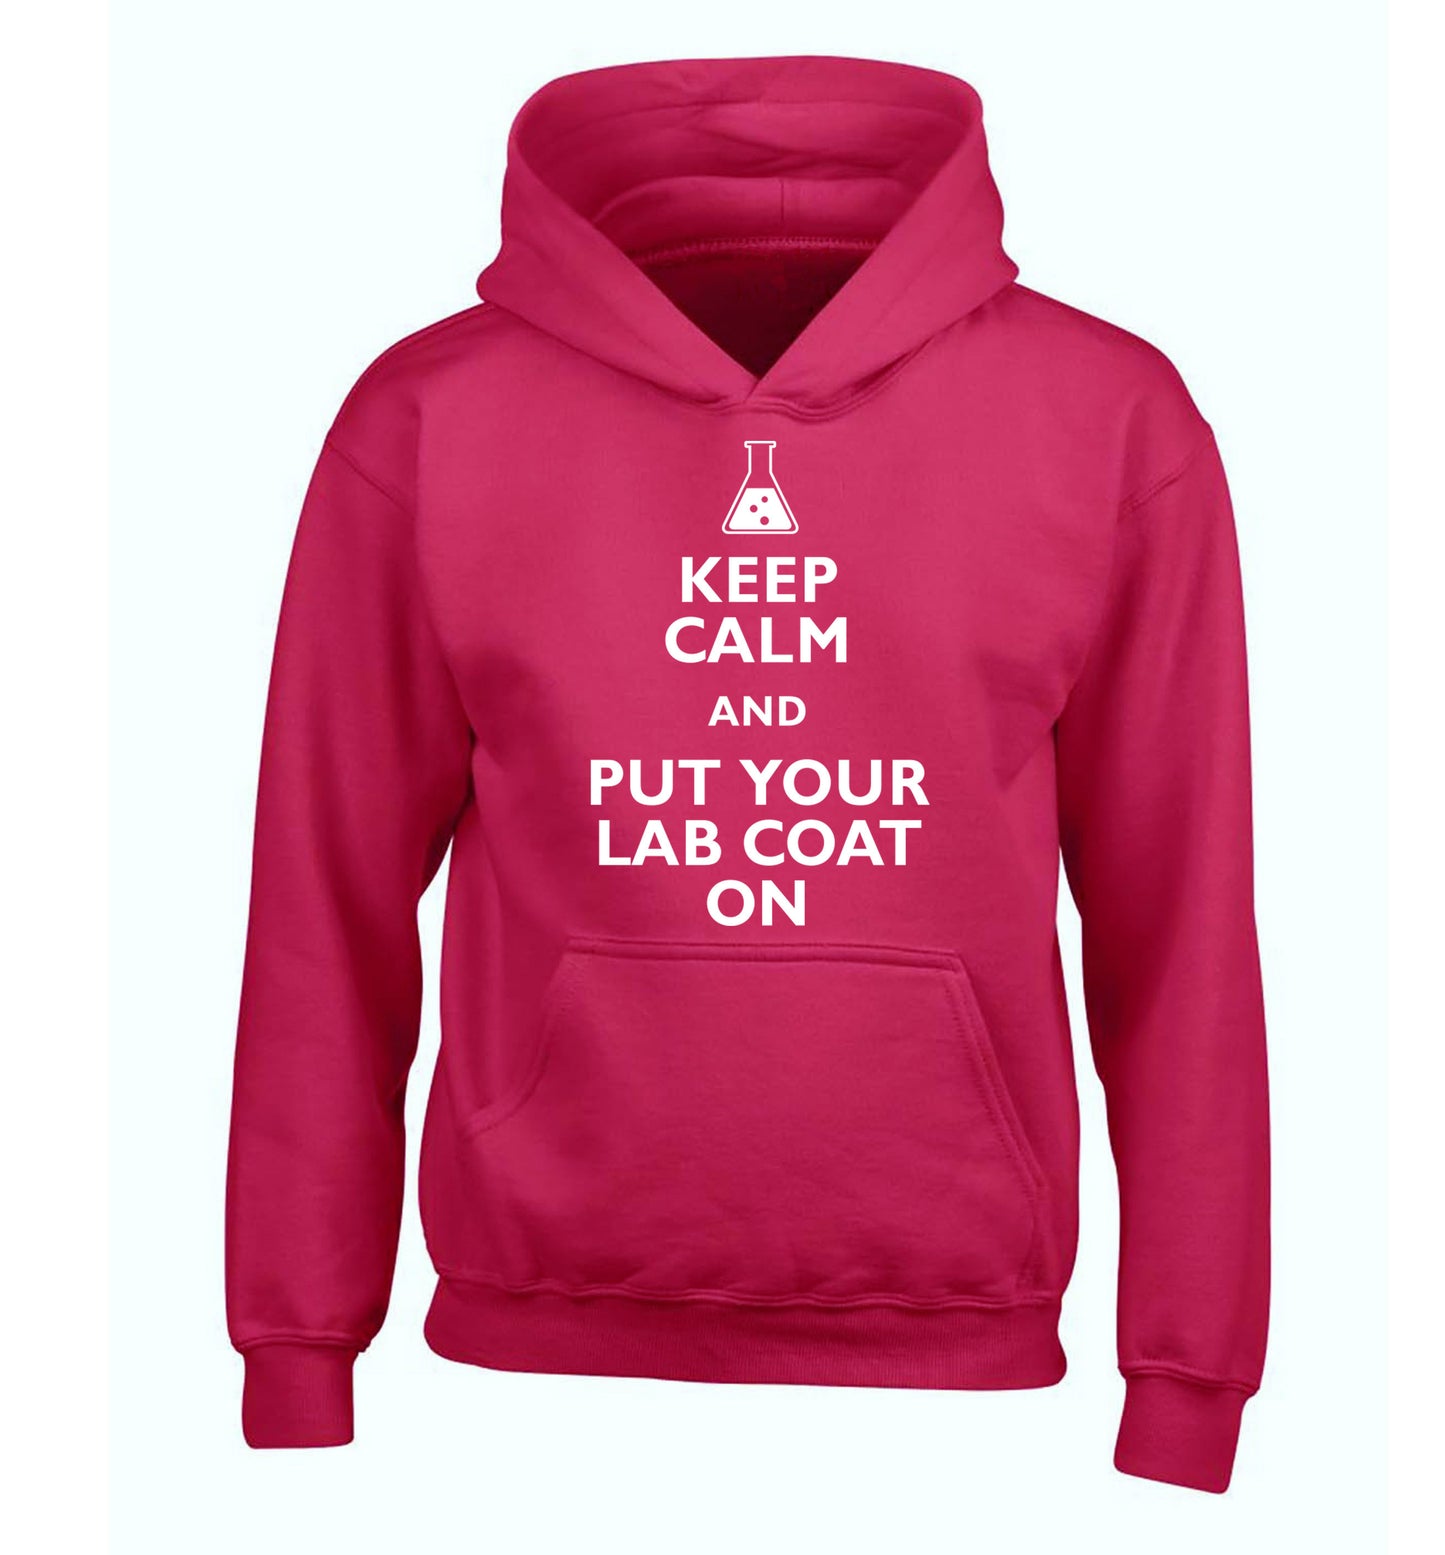 Keep calm and put your lab coat on children's pink hoodie 12-14 Years